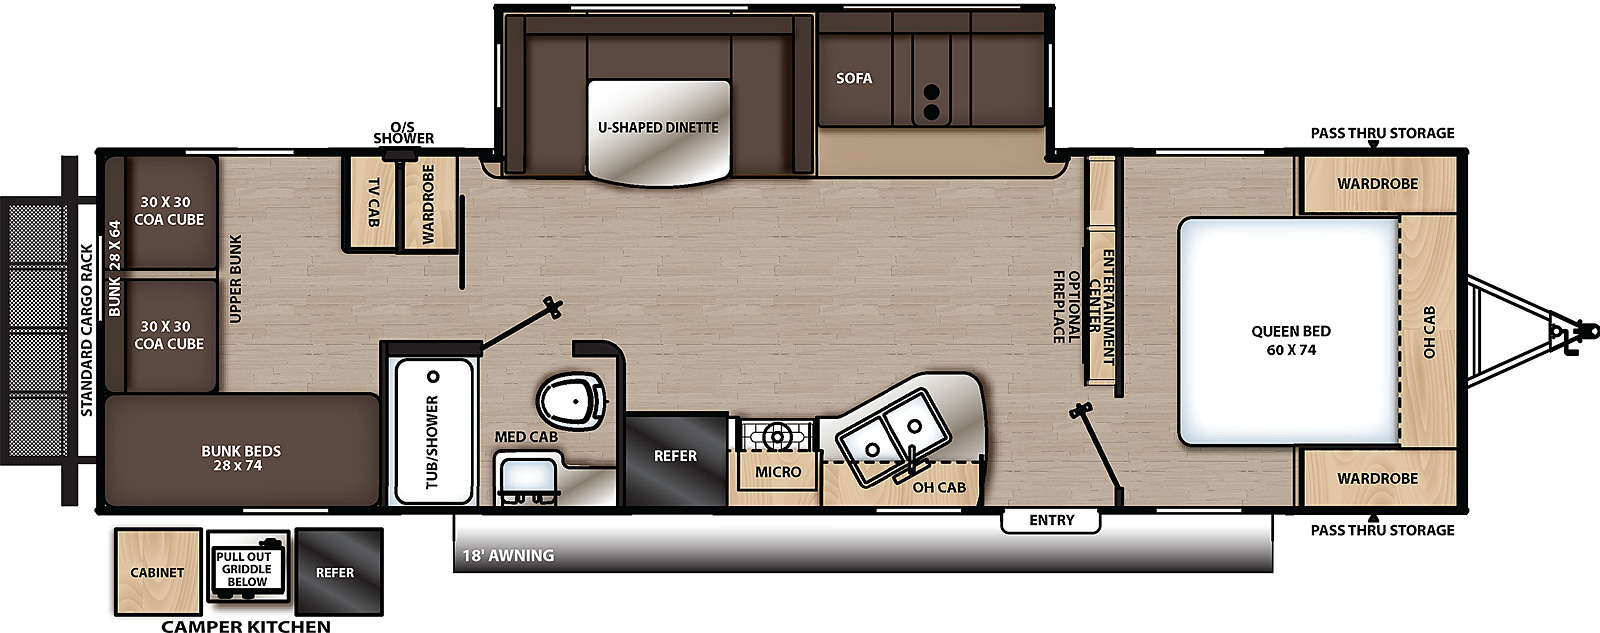 The 293QBCK has one slide out on the off-door side and one entry door on the door side. Interior layout from front to back: front bedroom with foot facing queen bed, overhead cabinet, and wardrobes on either side of the bed; entertainment center; kitchen living dining area with off-door side slide out containing sofa and u-shaped dinette; door side kitchen containing double basin sink, overhead cabinet, cook top stove, microwave cabinet, and refrigerator; door side bathroom; and rear bedroom with door side bunks, wardrobe, television cabinet, and cubes with upper bunk.